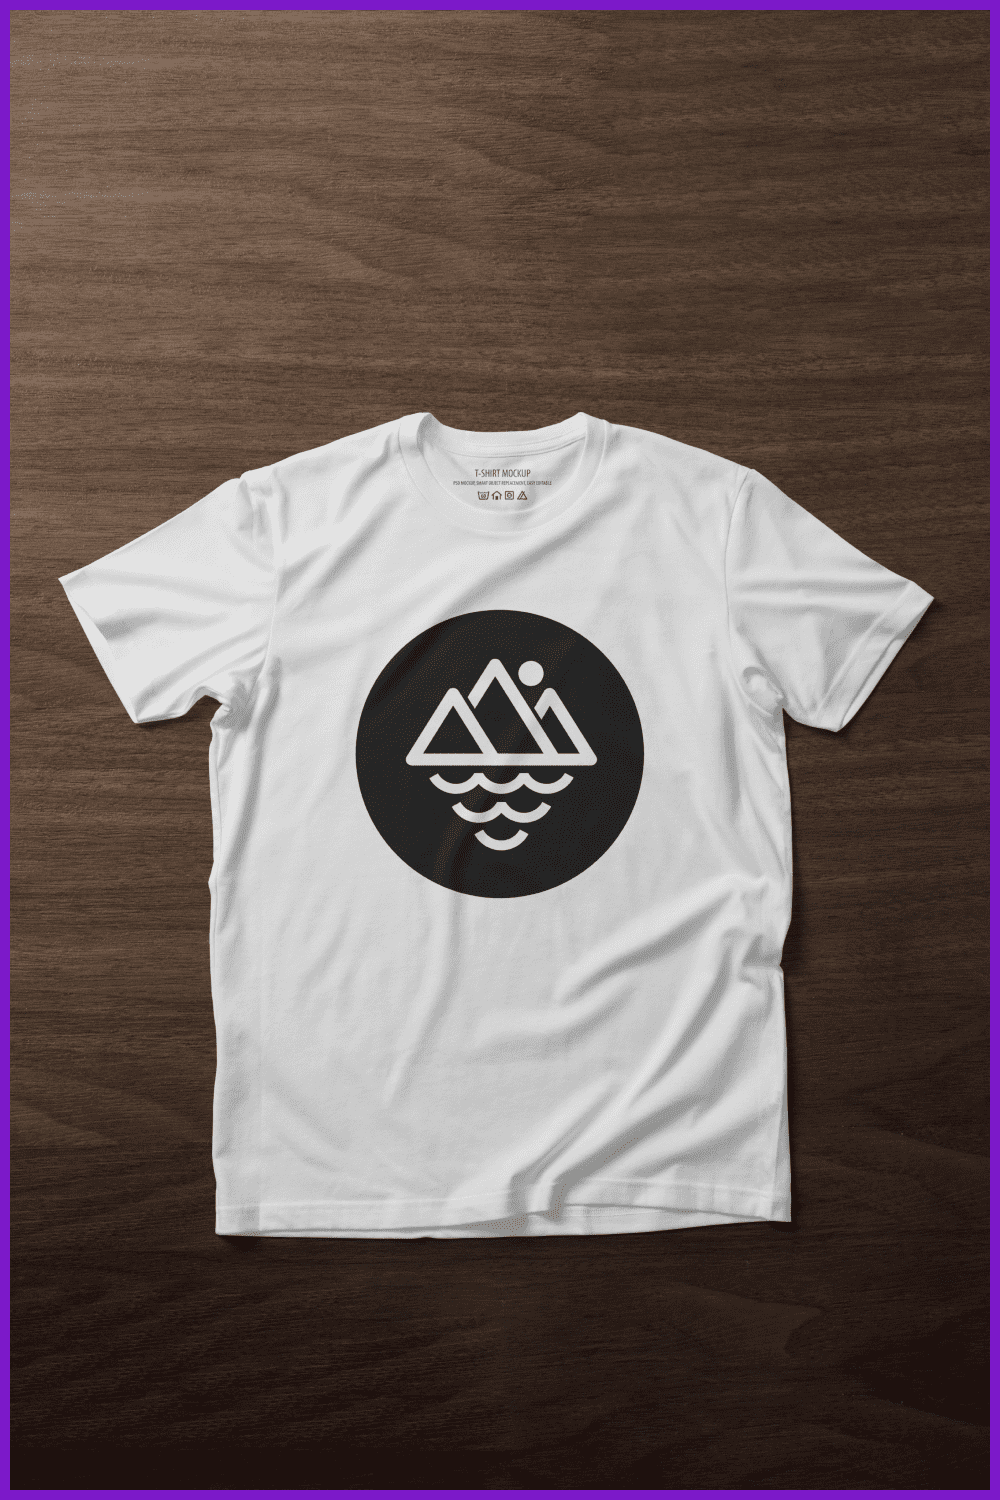 White T-shirt with a black circle with a sketch of the sea and mountains.